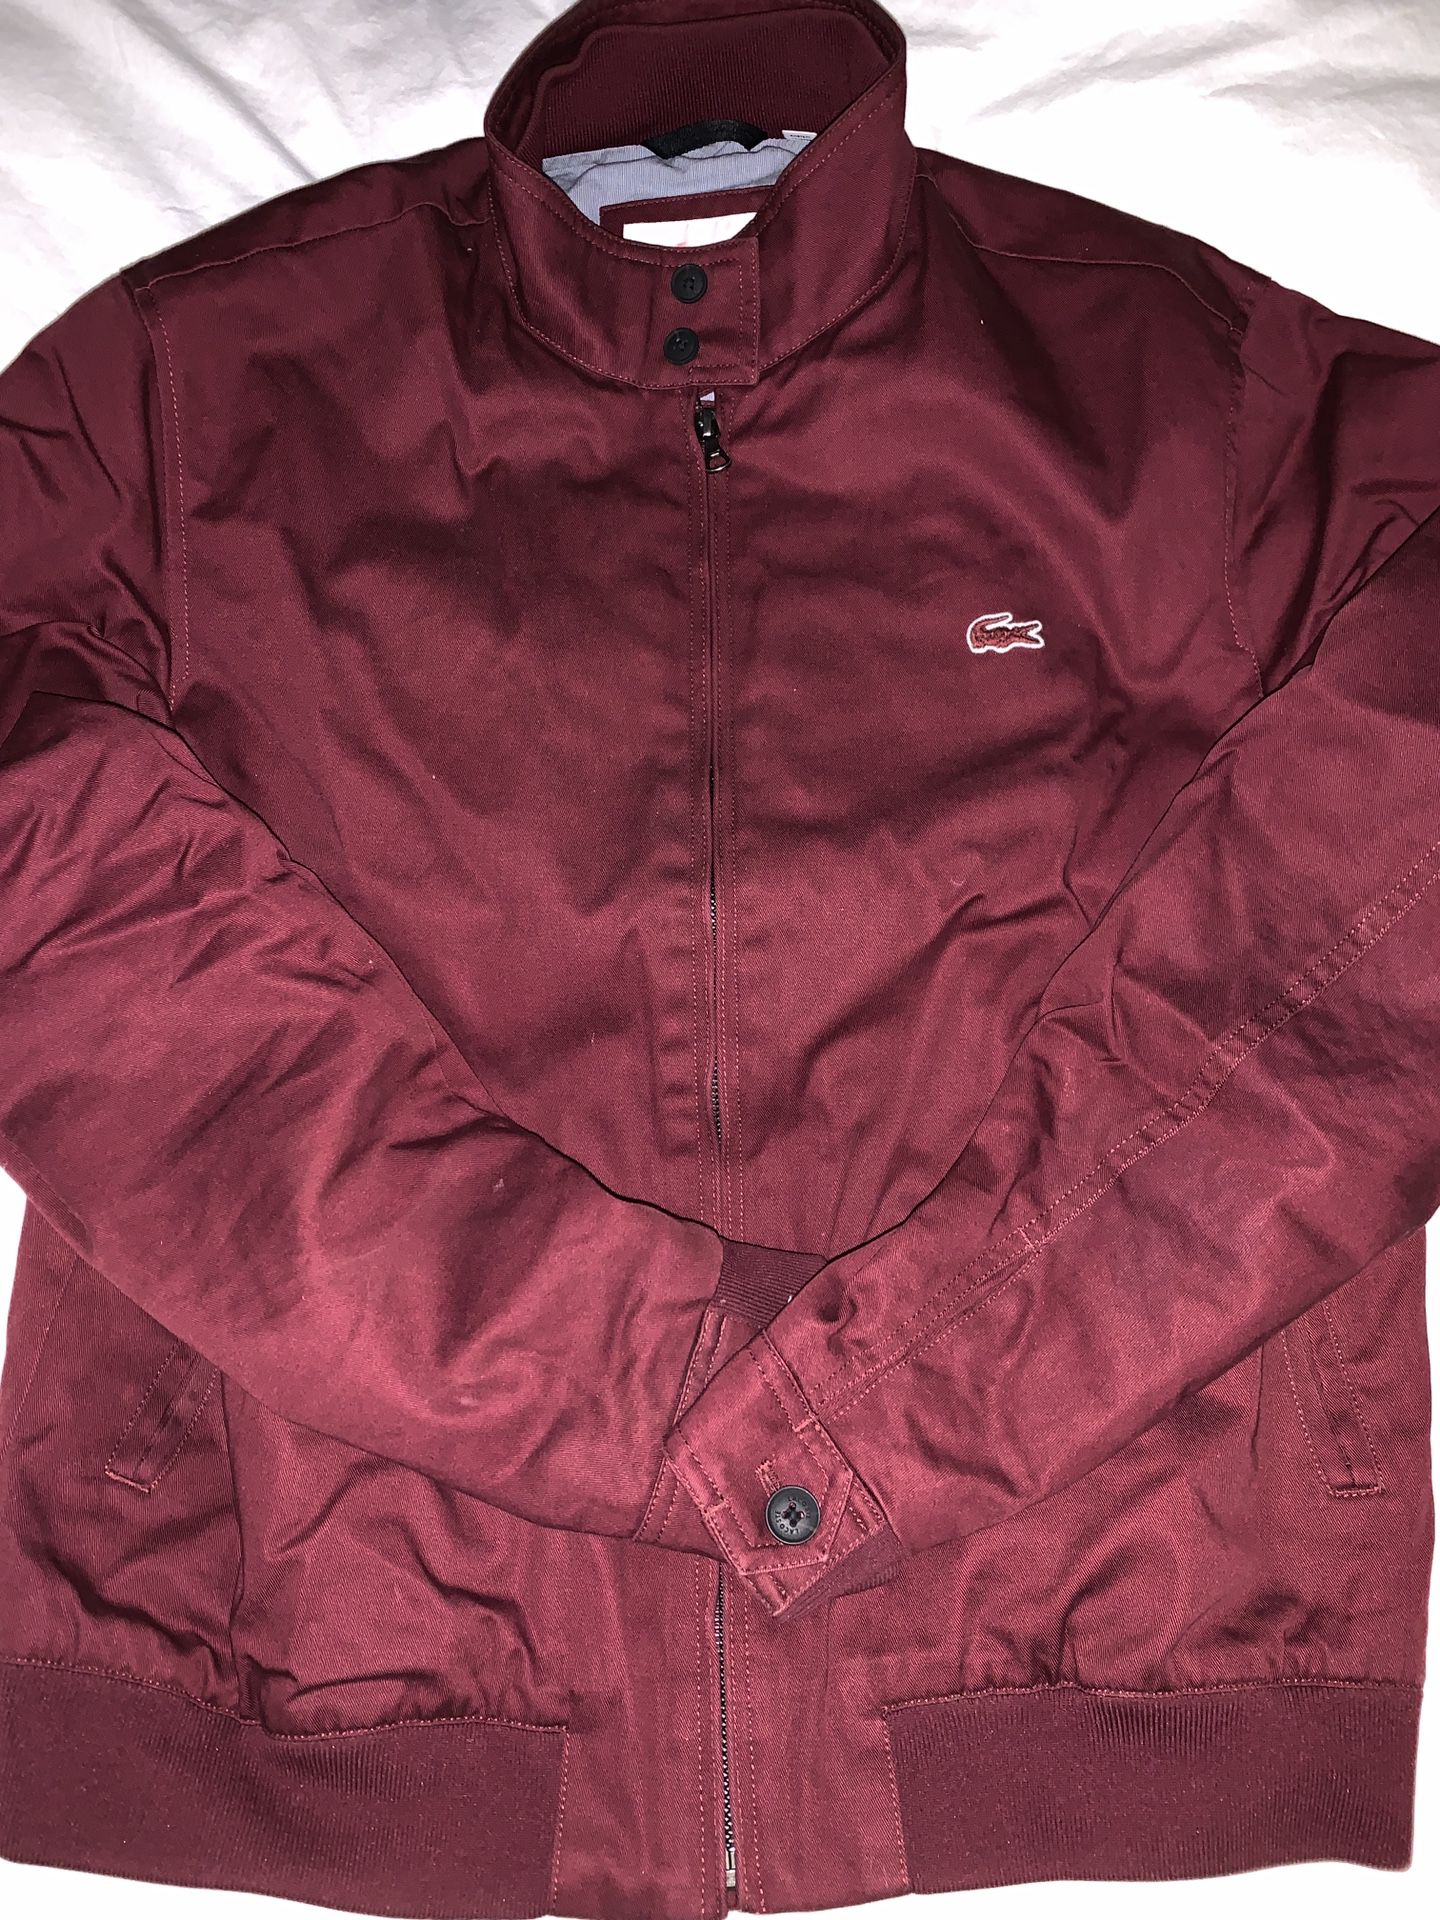 Lacoste Jacket for in New York, NY OfferUp